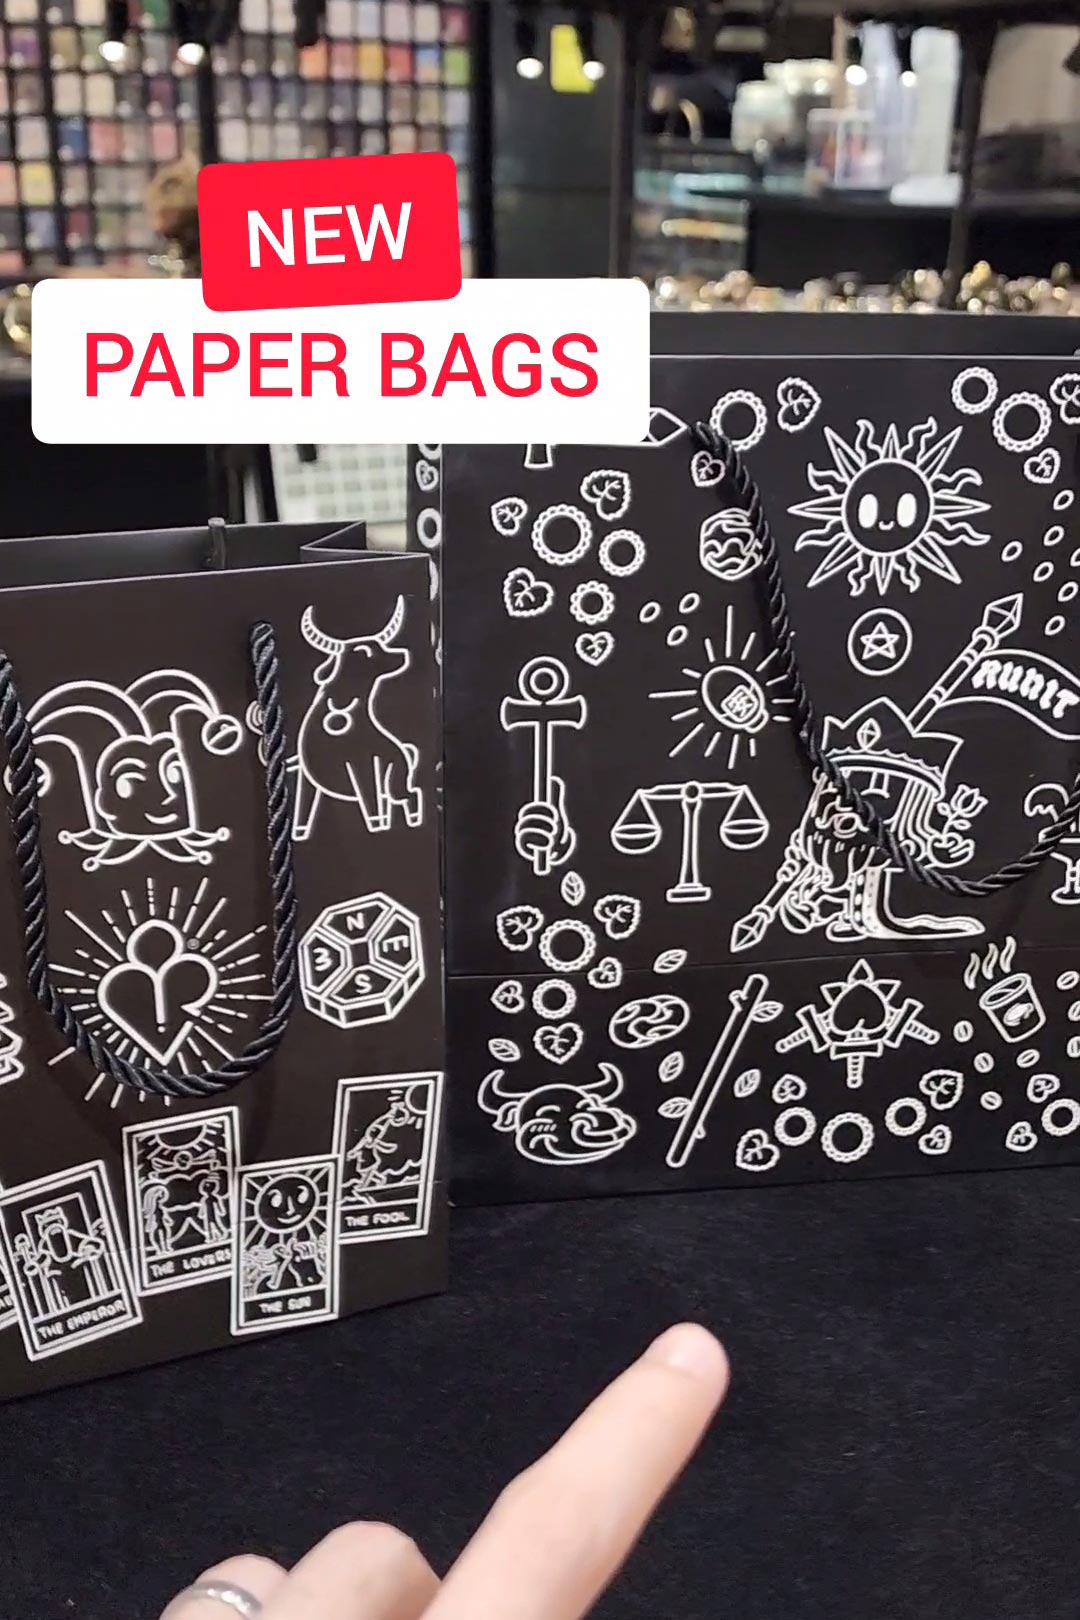 New Paper Bags!